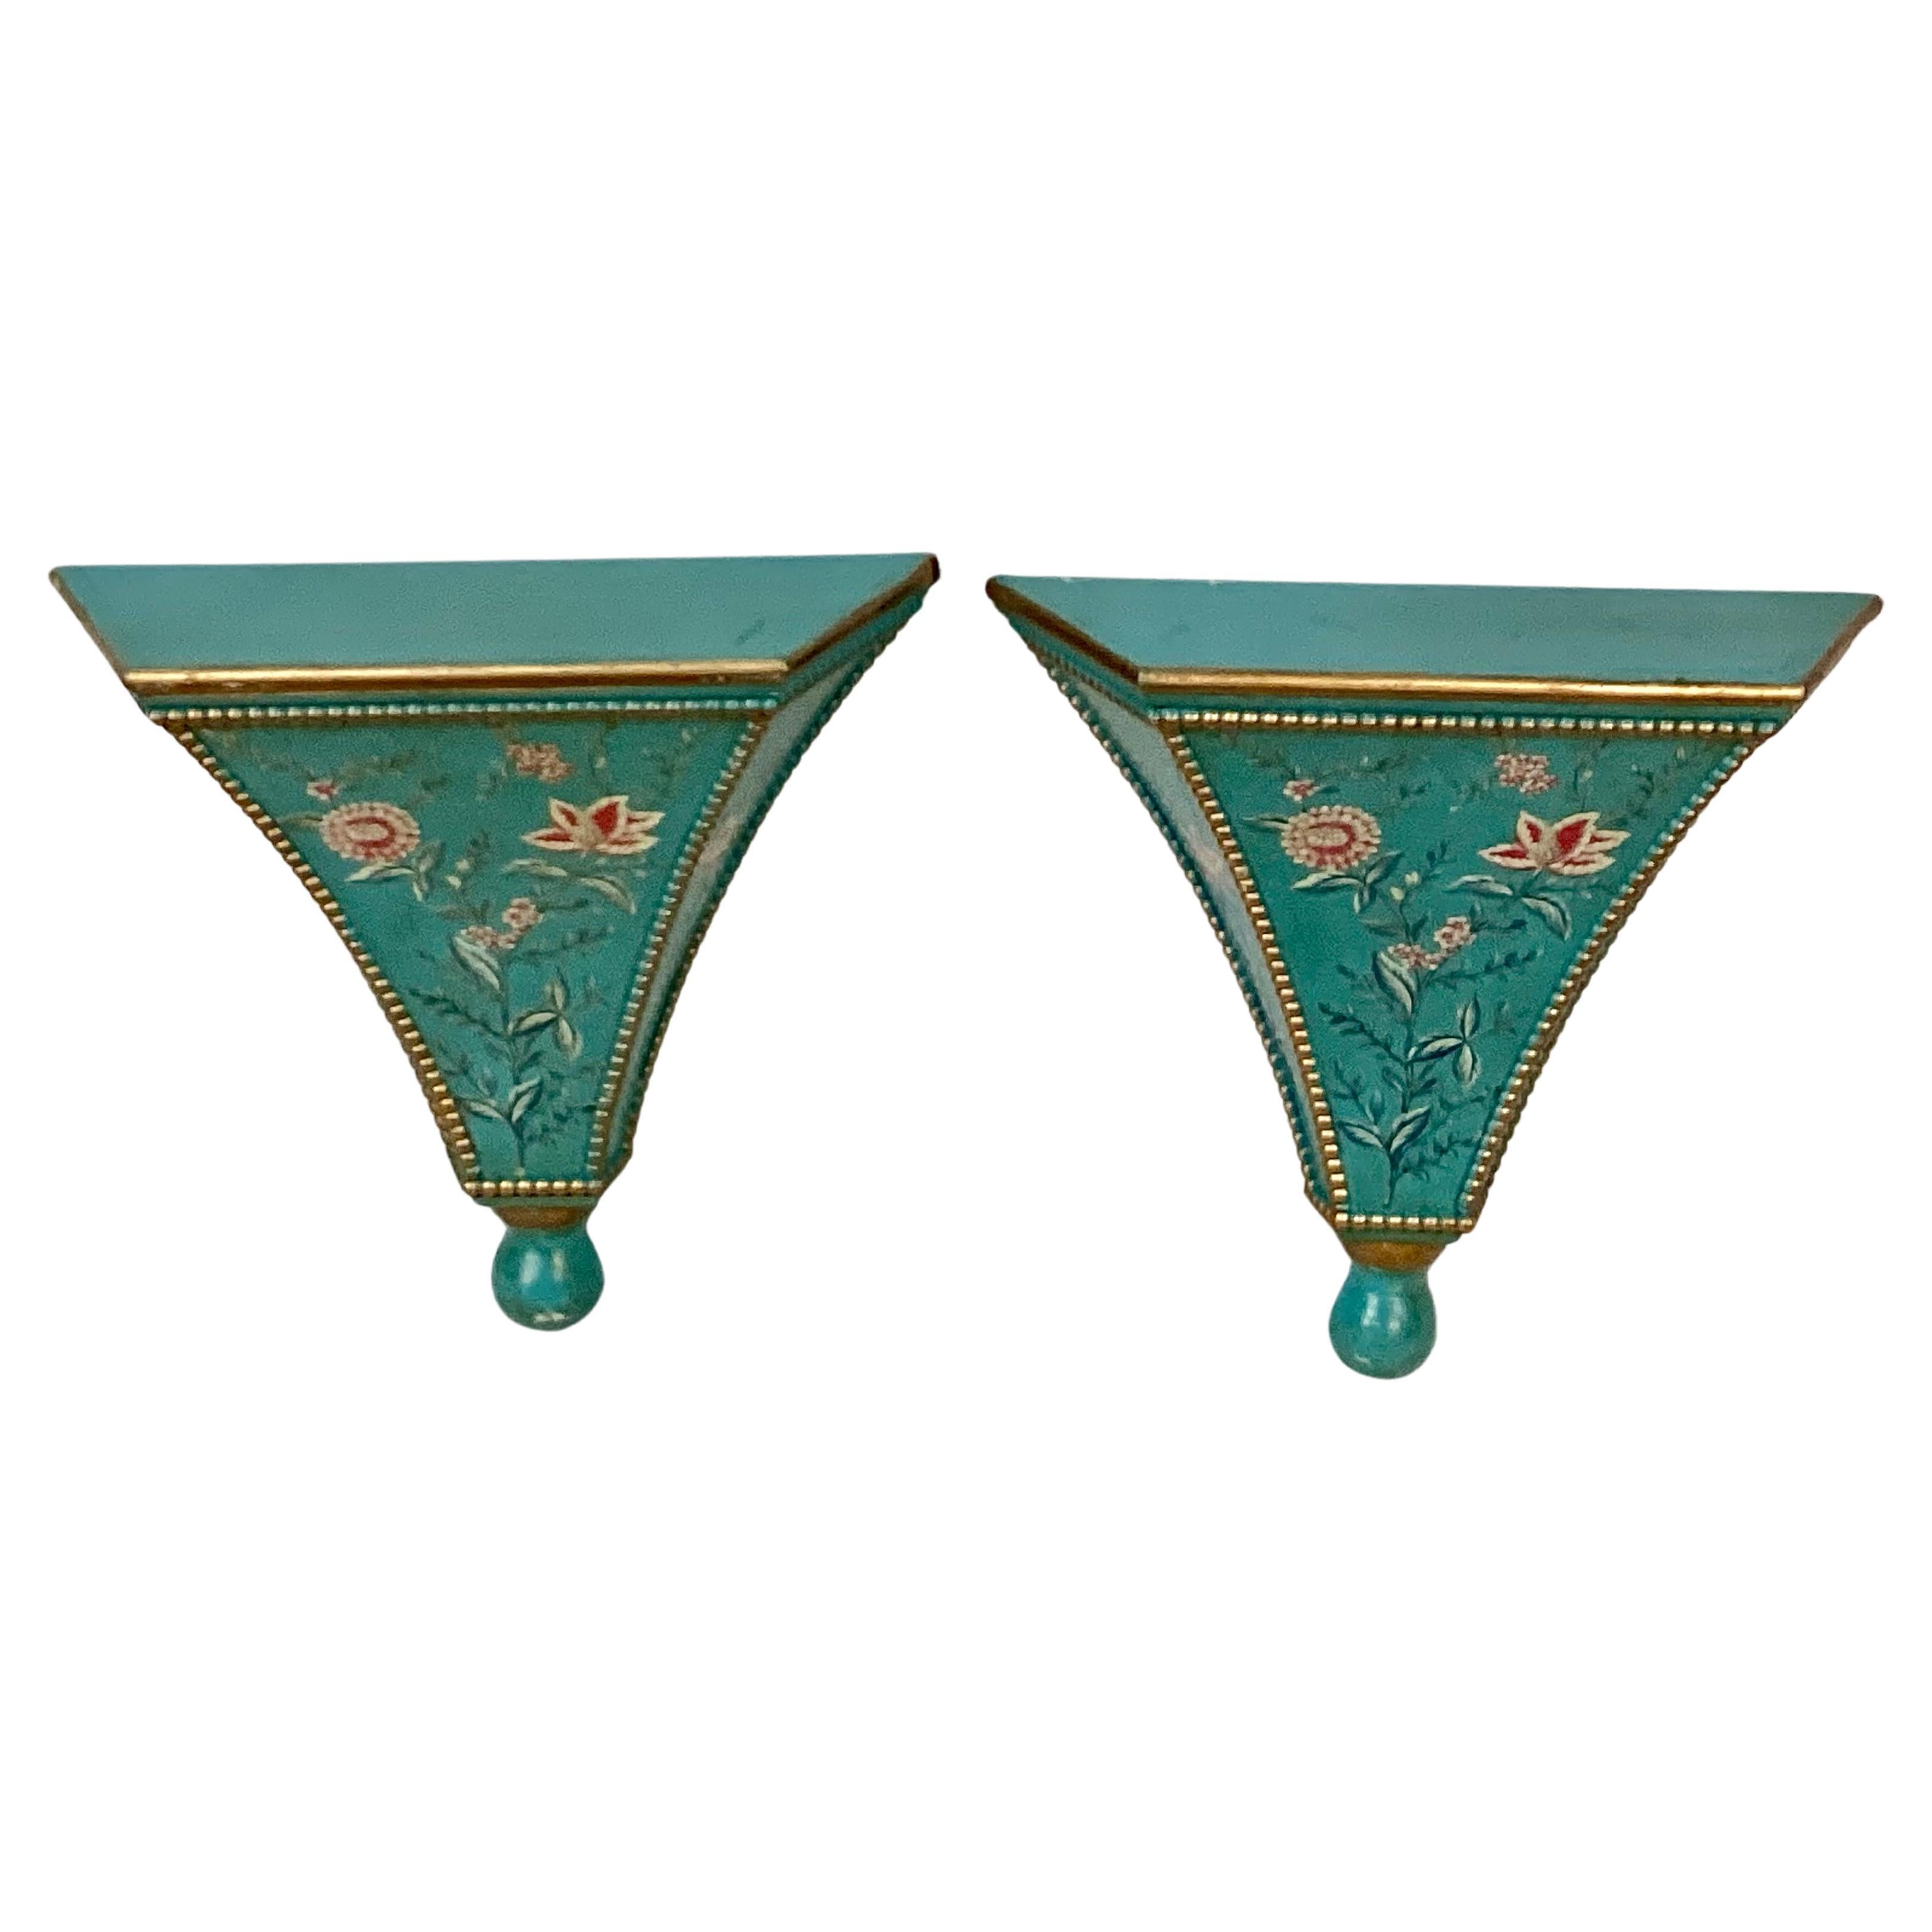 Pair of mid-century beautifully hand-painted wall brackets/sconces. Wall brackets have gold trim with foliage and pink florals on a turquoise background. Wide 5.5